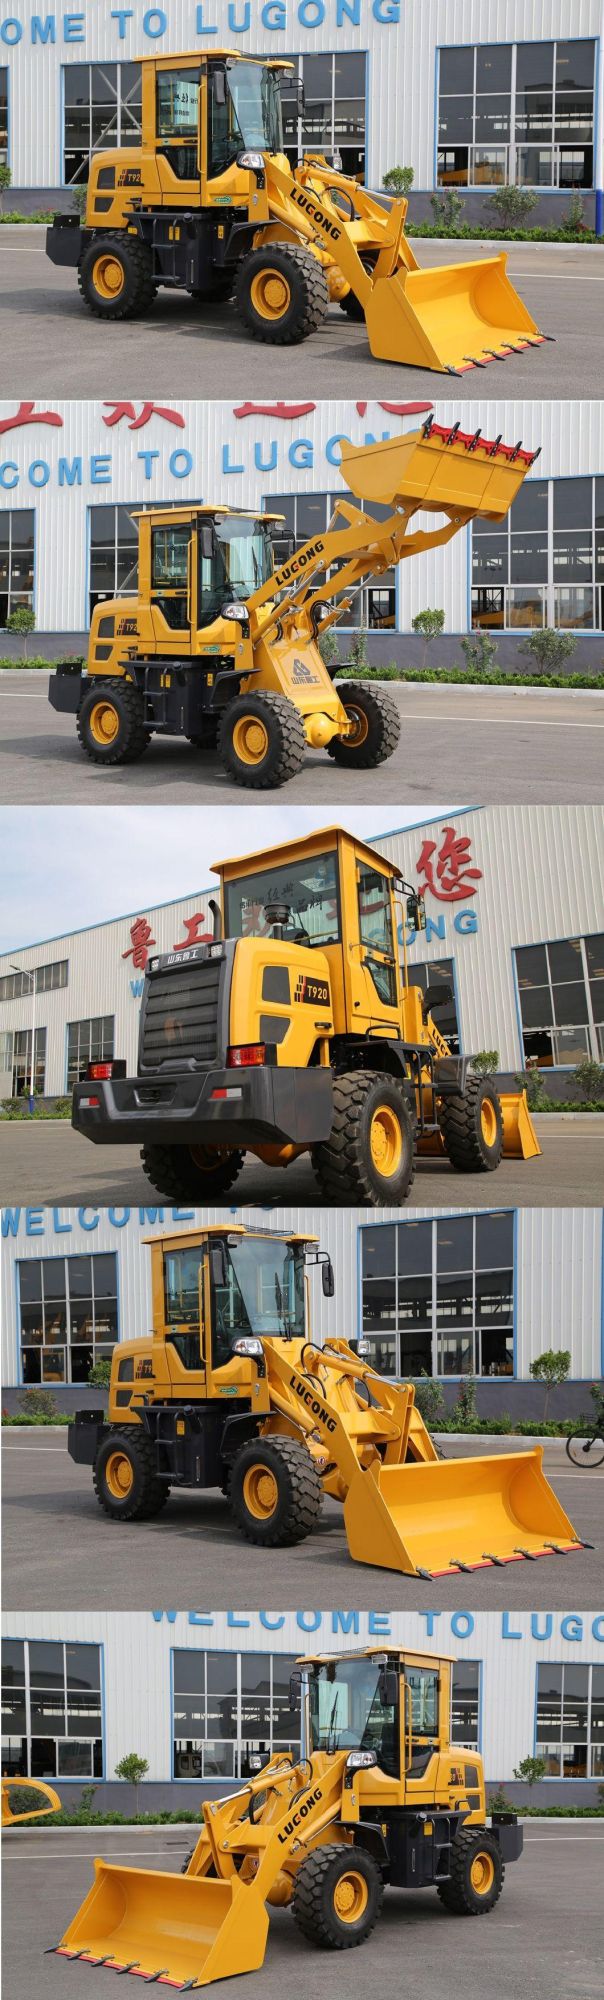 Front End Model Lugong Mini Loadres Factory Price Cheap T920 Wheel Loader